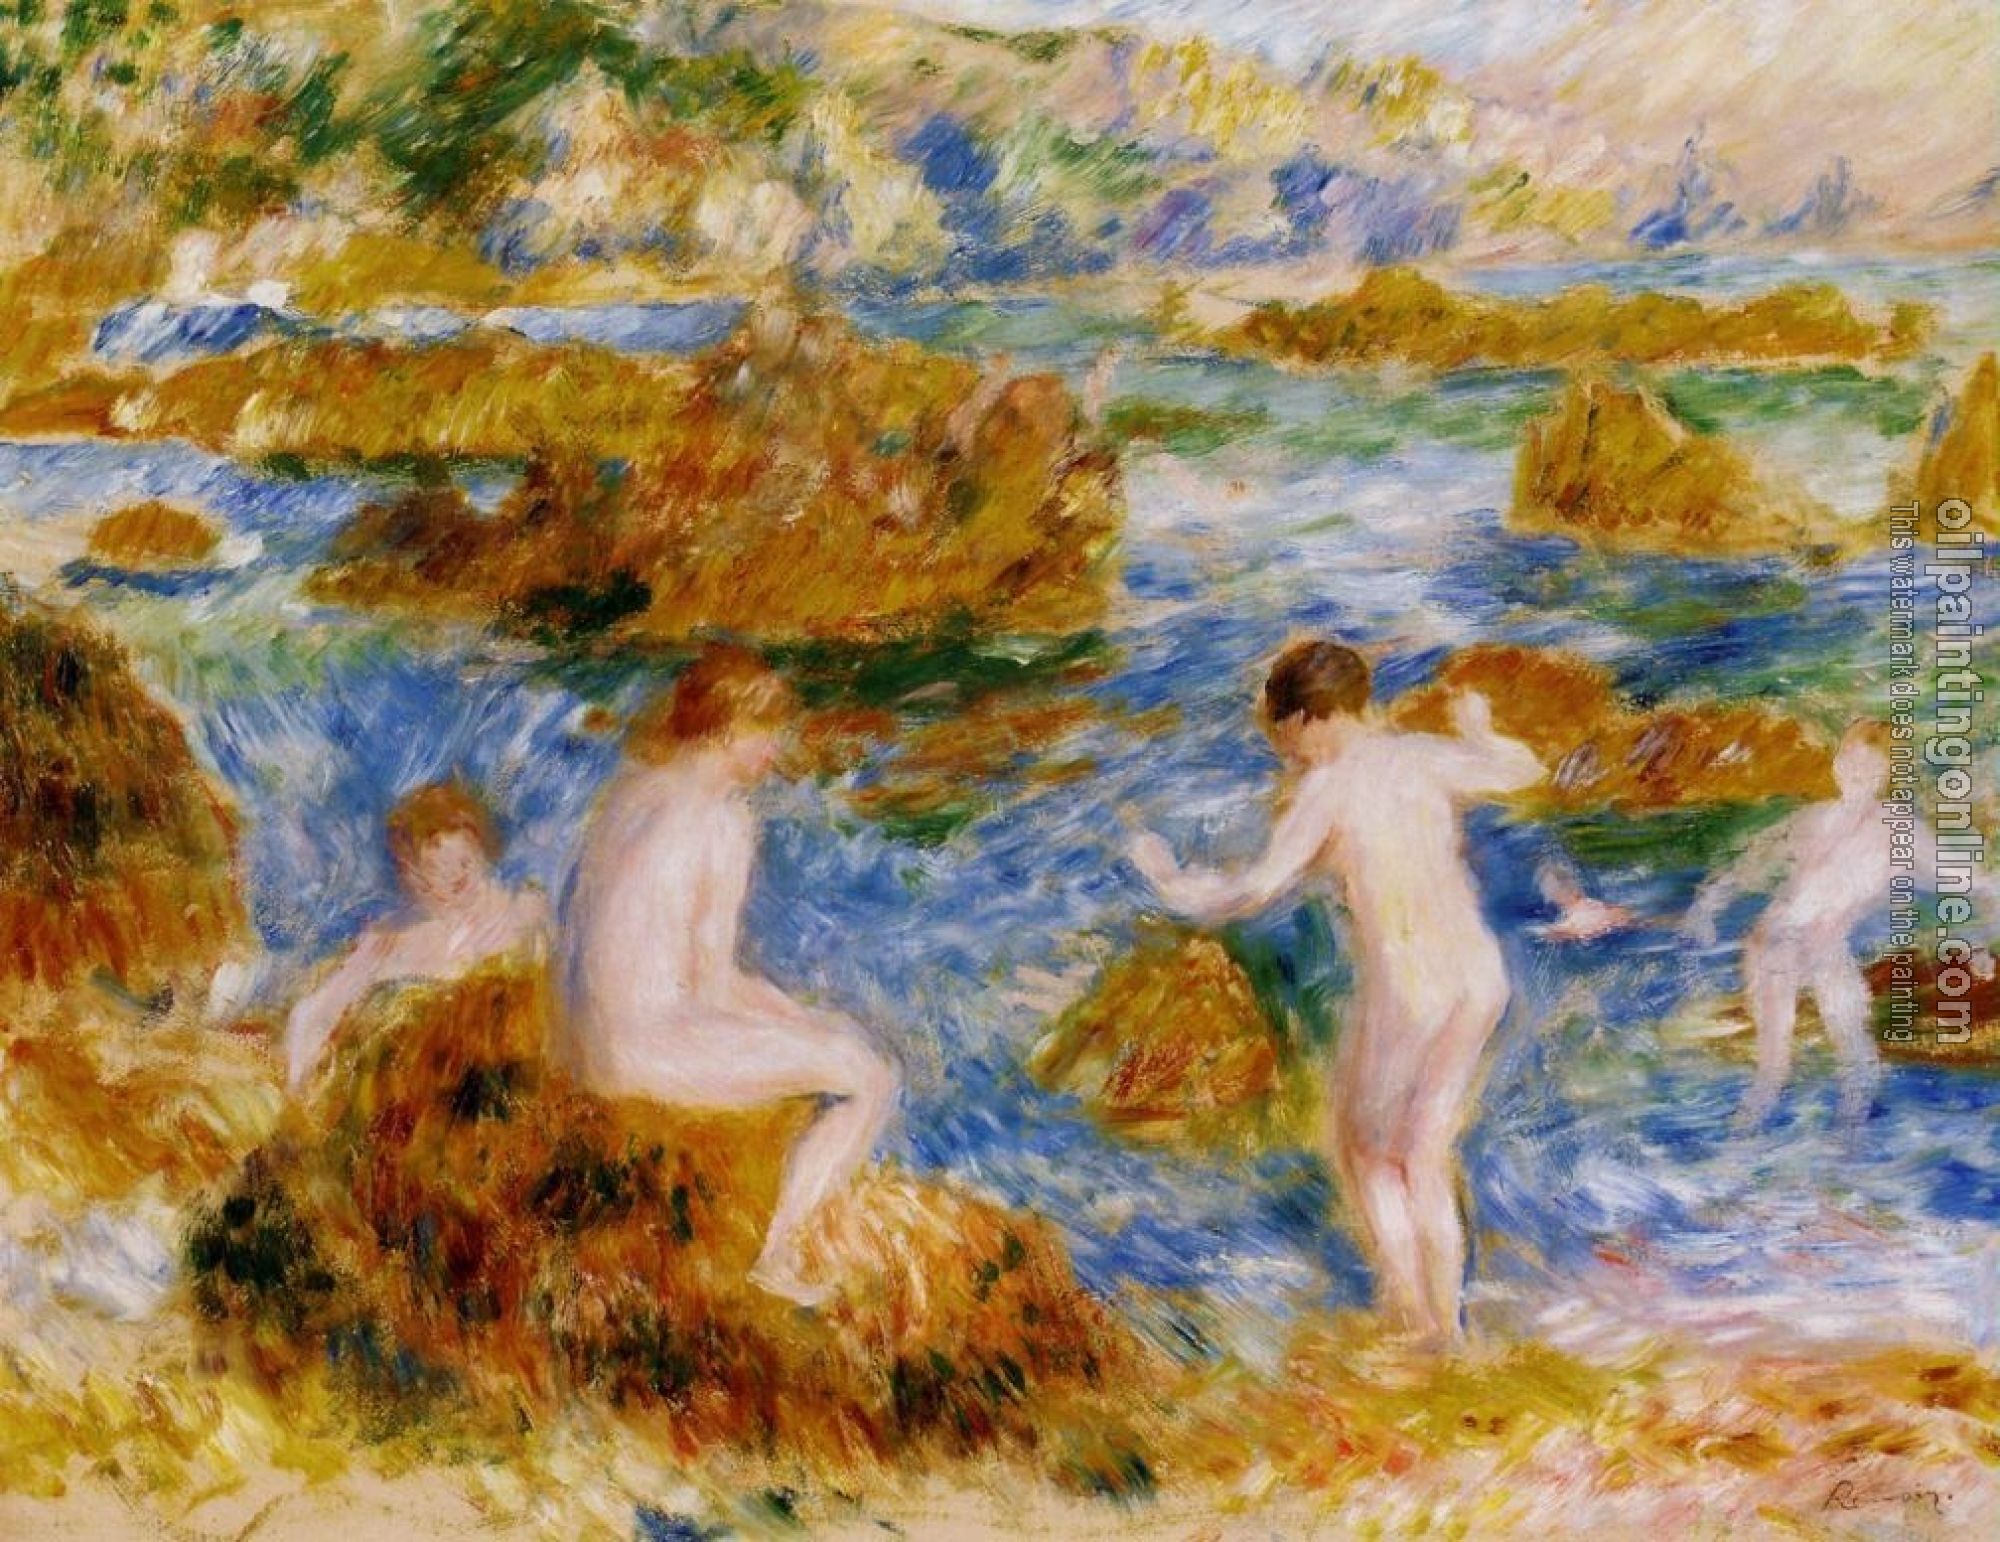 Renoir, Pierre Auguste - Nude Boys on the Rocks at Guernsey